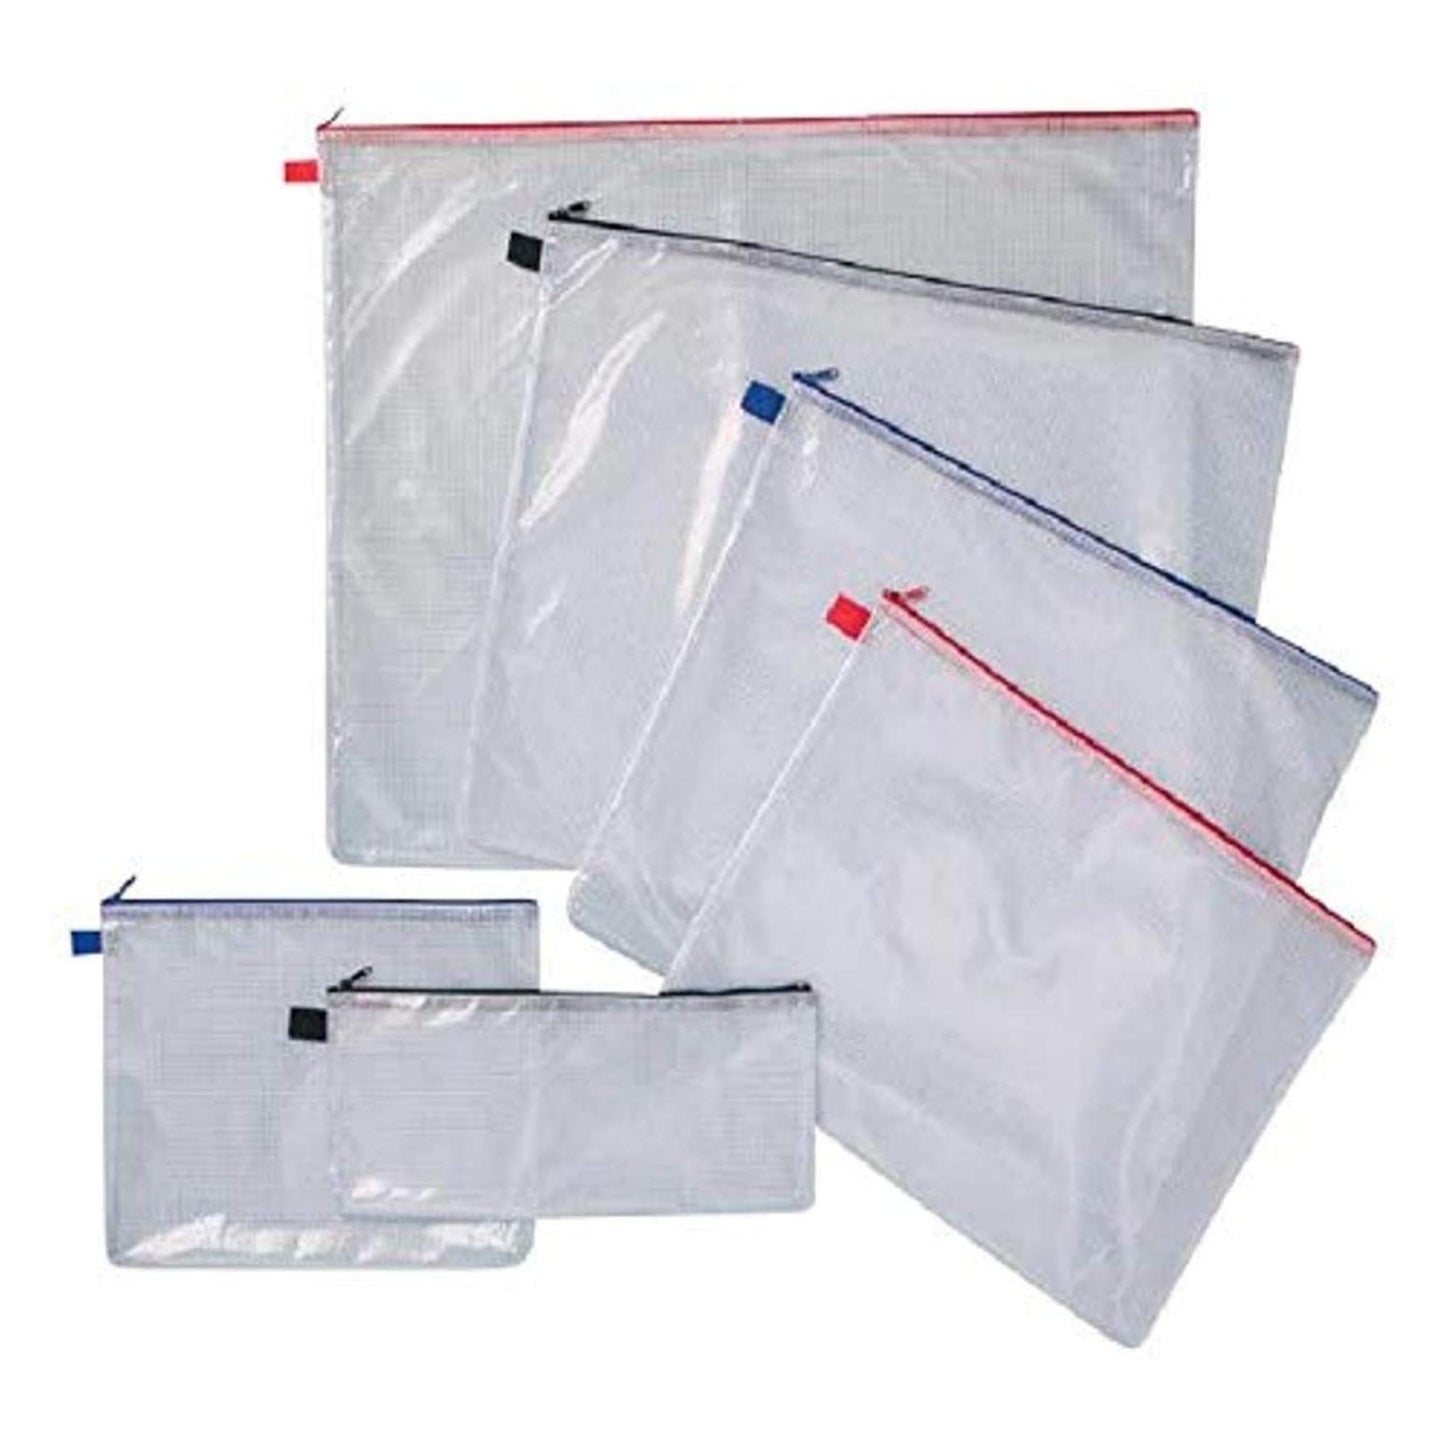  ALVIN - NB1824 Clear PVC Mesh Kit Zipper Bag, Multi-Use  Organization Bag for Item Storage and Arranging, Great for Needlework  Projects, Art Supplies, and Travel - 18 x 24 Inch Bag